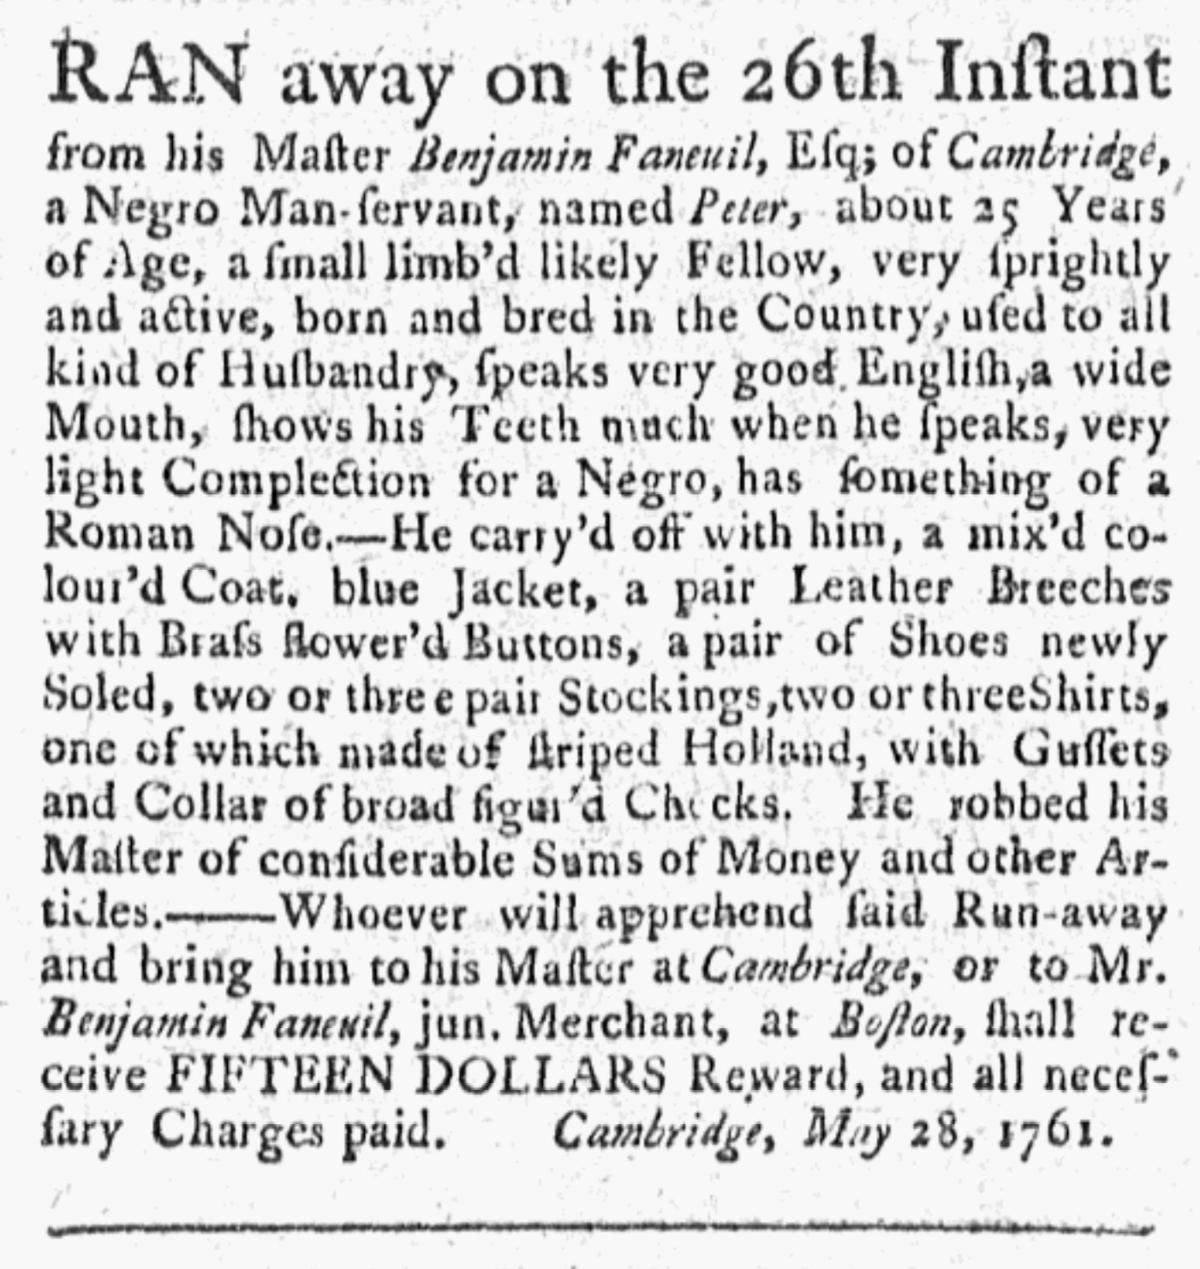 An 1761 newspaper ad detailing Peter's escape and offering 15 dollars for his return to his enslaver, Benjamin Faneuil.